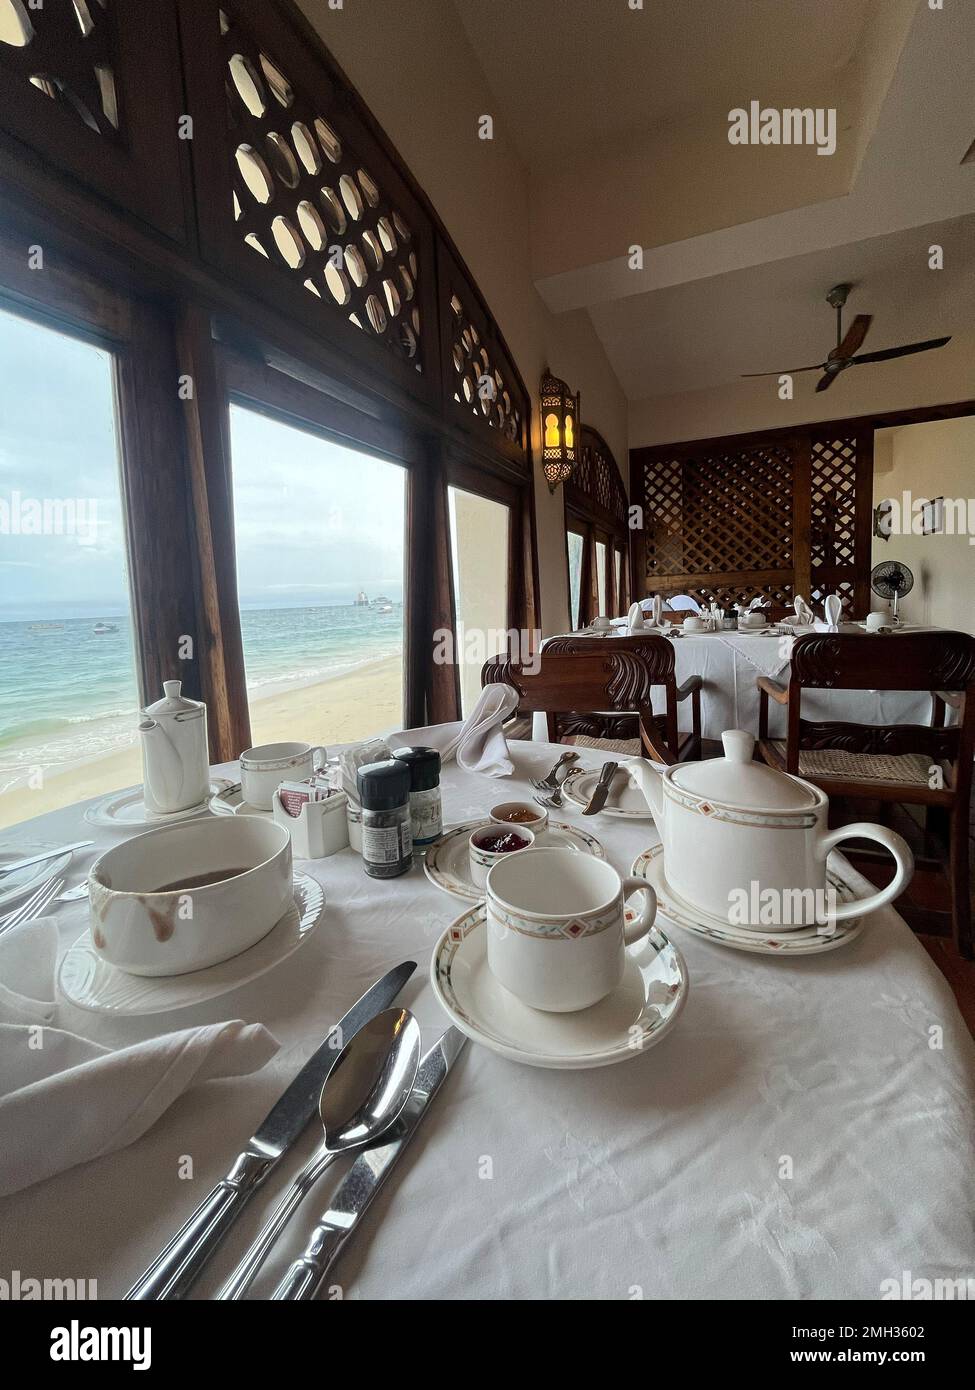 Tourism has tea time in front of the beach and breakfast in the hotel restaurant or buffet with a beach window view. Zanzibar, Tanzania. Stock Photo